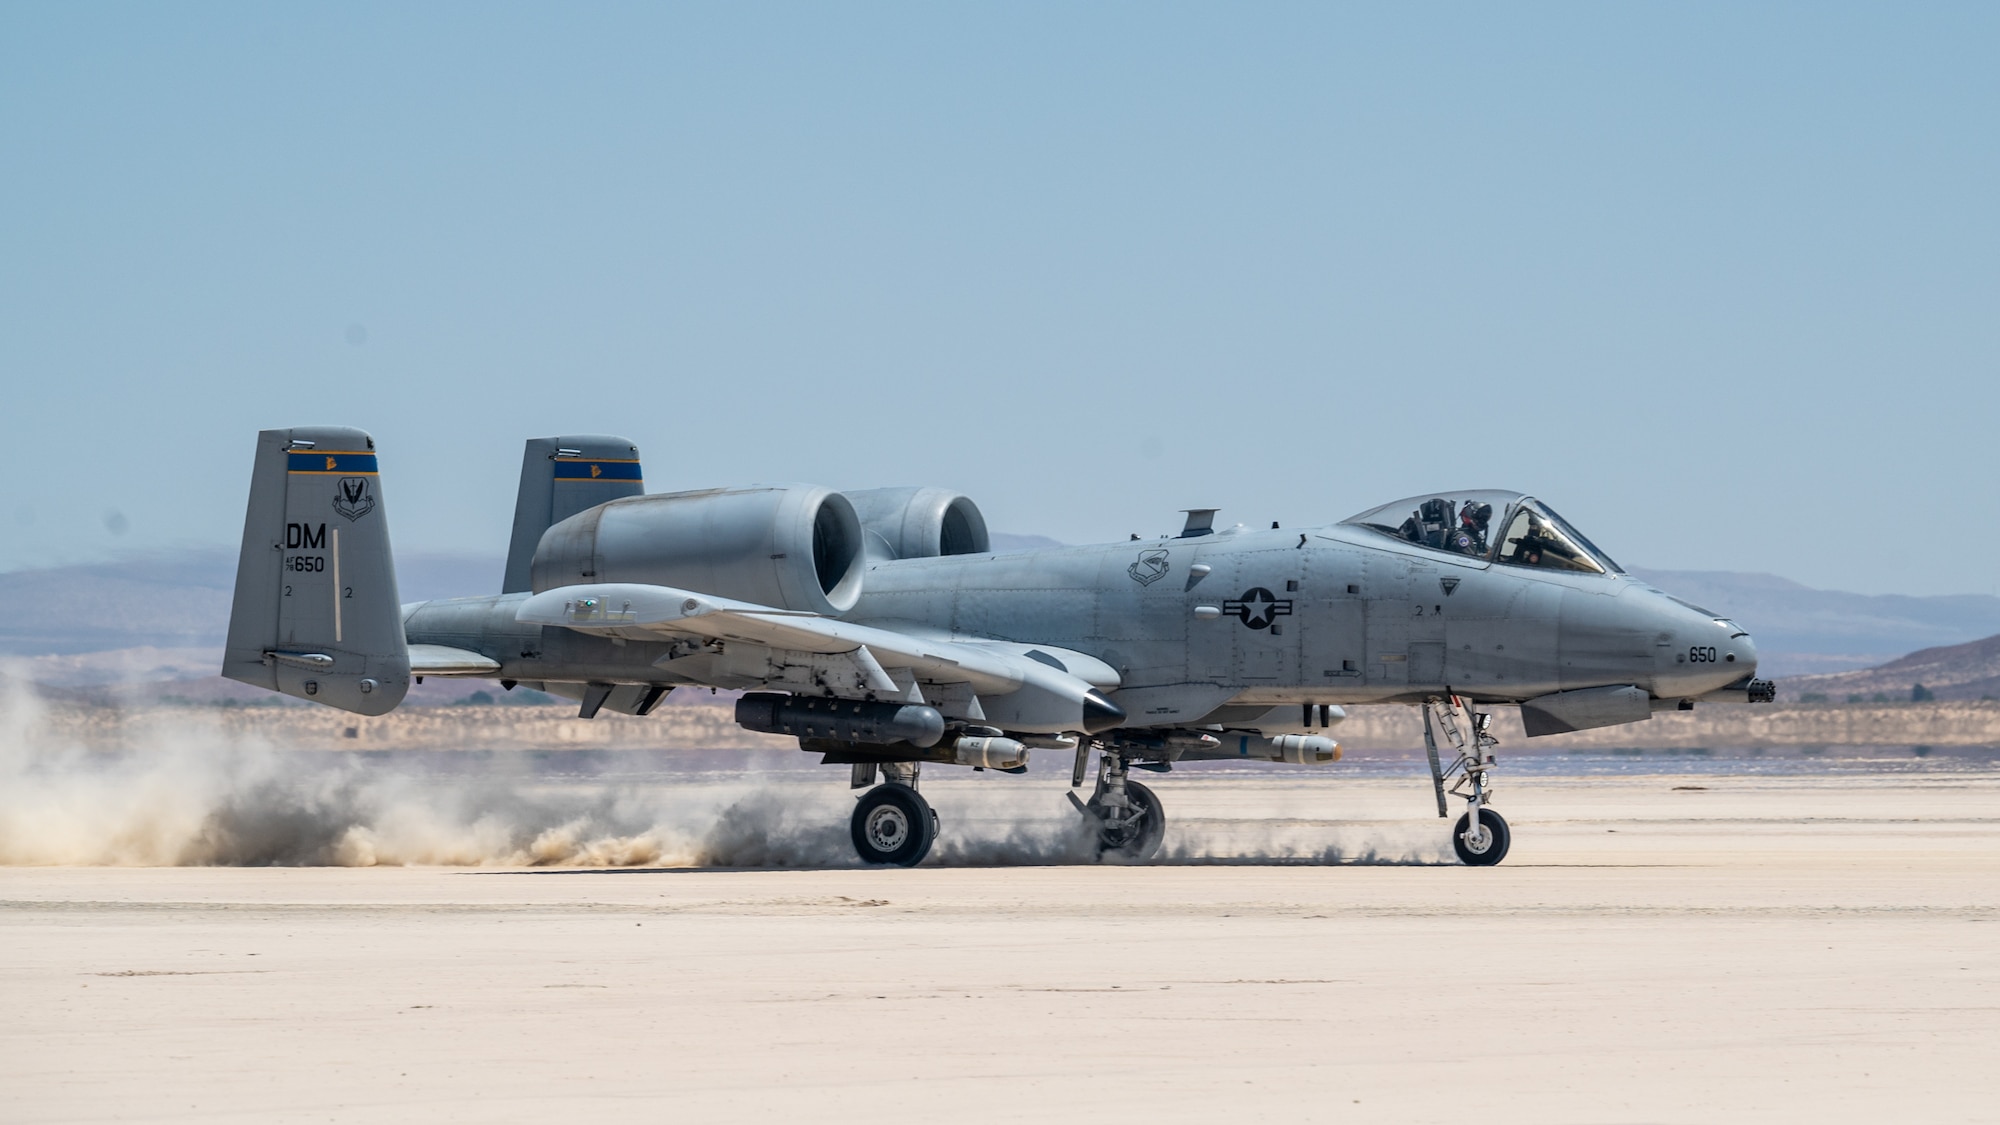 An A-10 Thunderbolt II, assigned to the 355th Wing, out of Davis-Monthan Air Force Base, Arizona, takes off from Rogers Dry Lake during an Agile Combat Employment Exercise on Edwards Air Force Base, California, June 27. The training featured Airmen from the 821st Contingency Response Squadron, out of Travis Air Force Base, California, and the 412th Operations Support Squadron based at Edwards AFB. (Air Force photo by Giancarlo Casem)